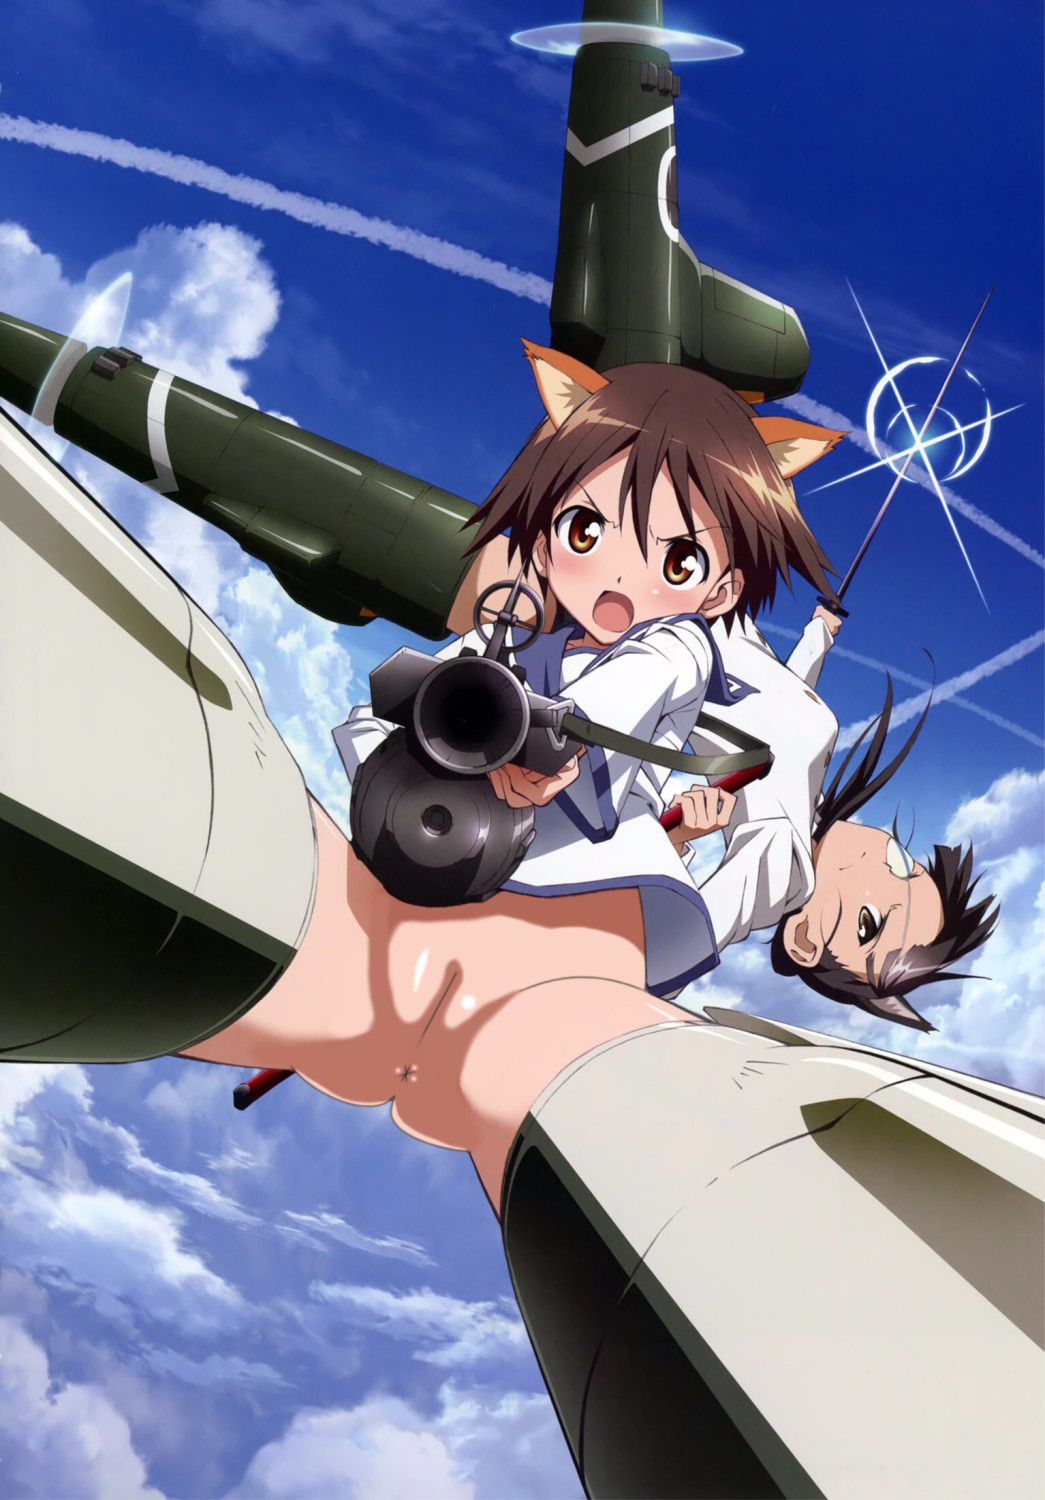 Strike Witches Serie stripped of Photoshop part 12 1